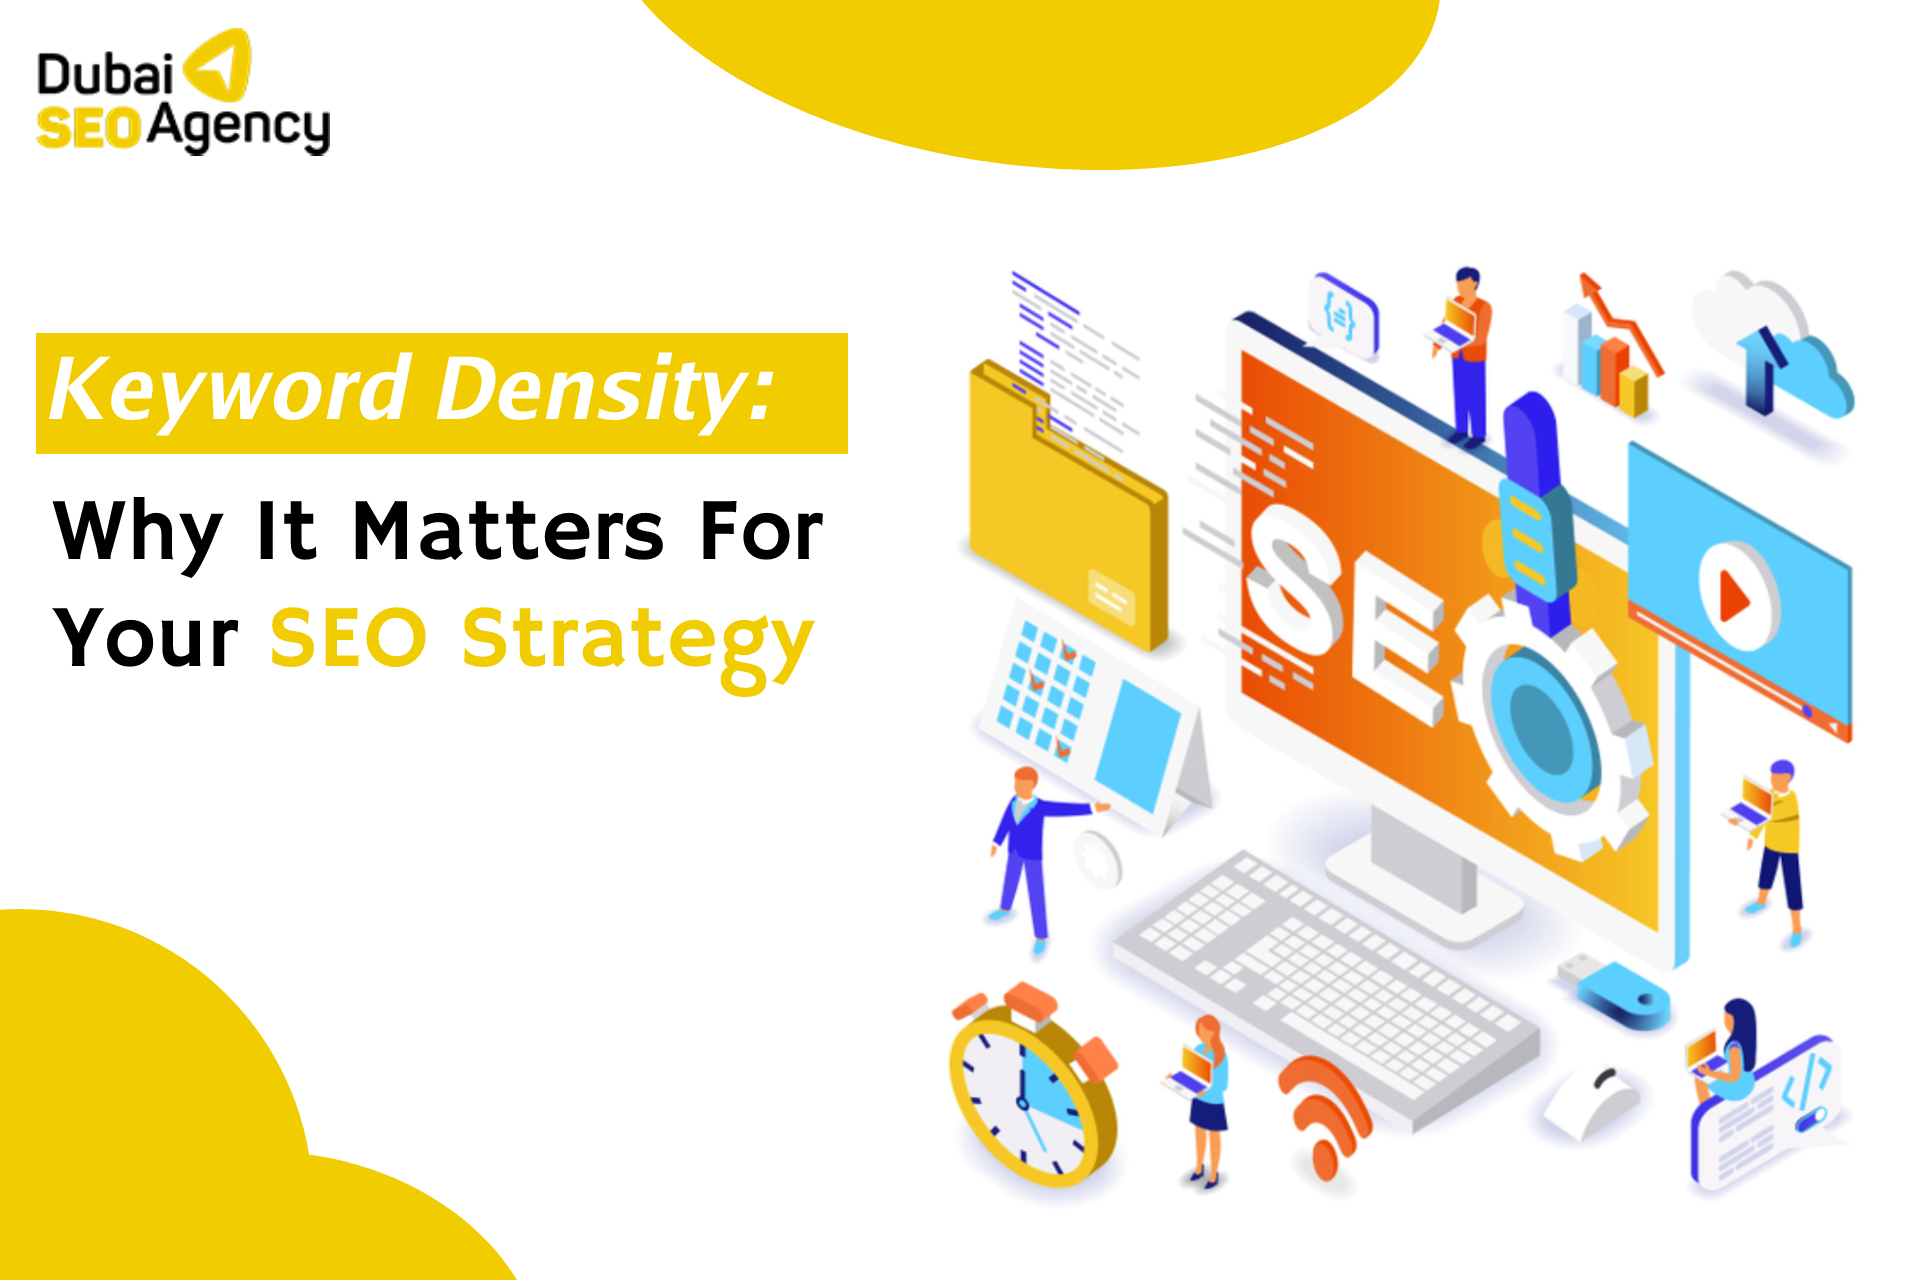 Keyword density: why it matters for your seo strategy